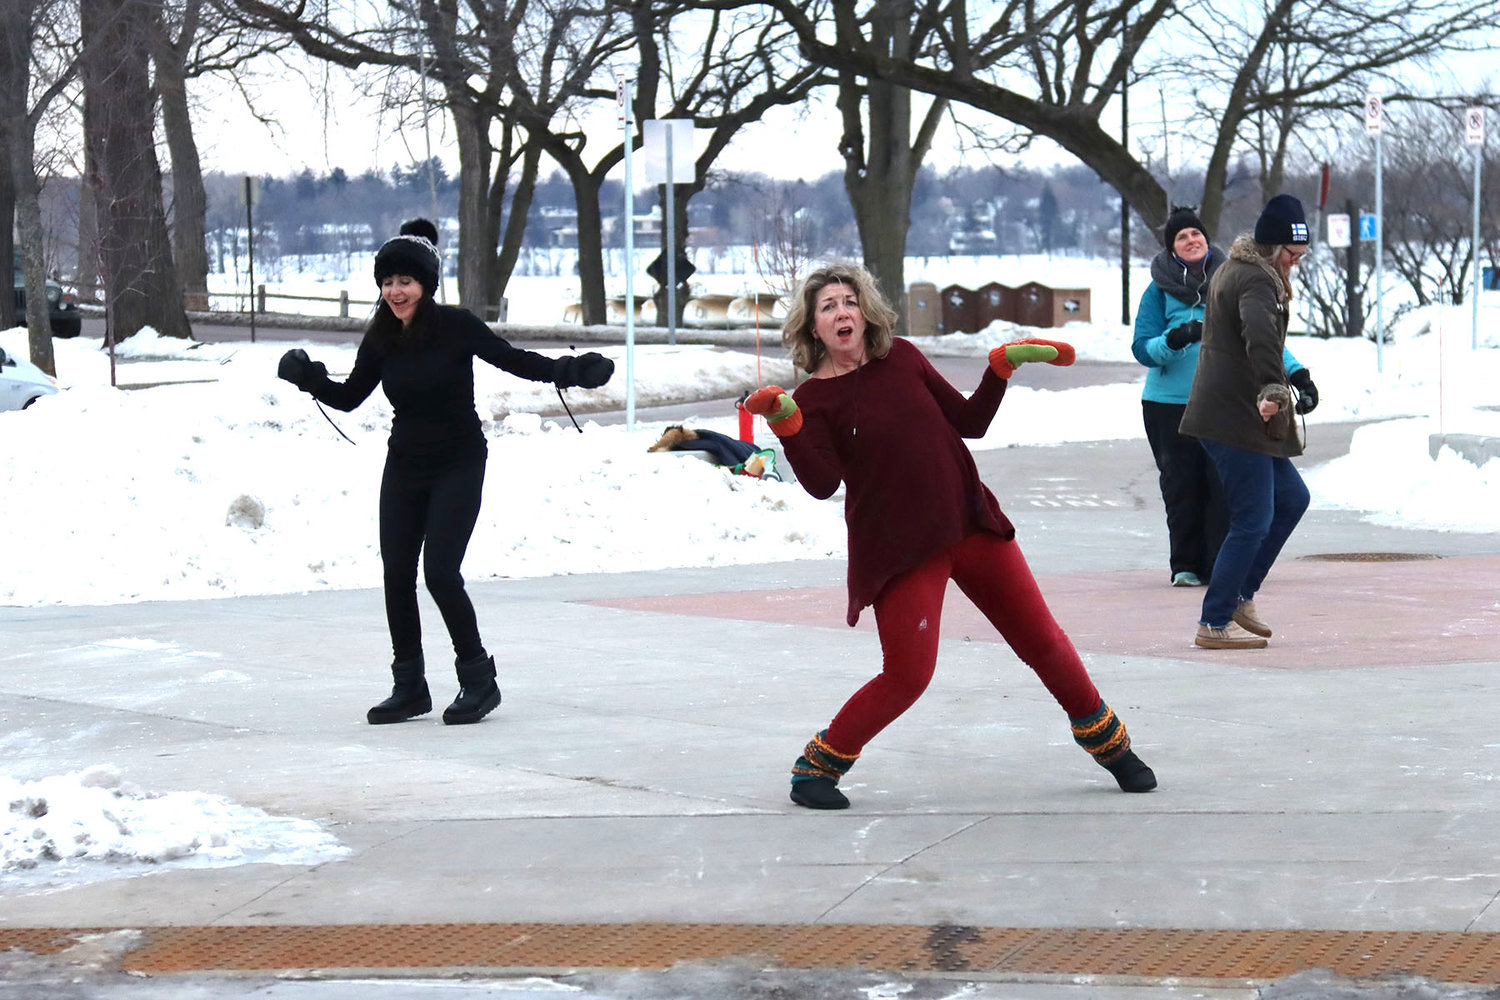 Nan Marie Zosel of Kingfield is energized by dancing with others at the corner of Bde Maka Ska Boulevard and Lake Street